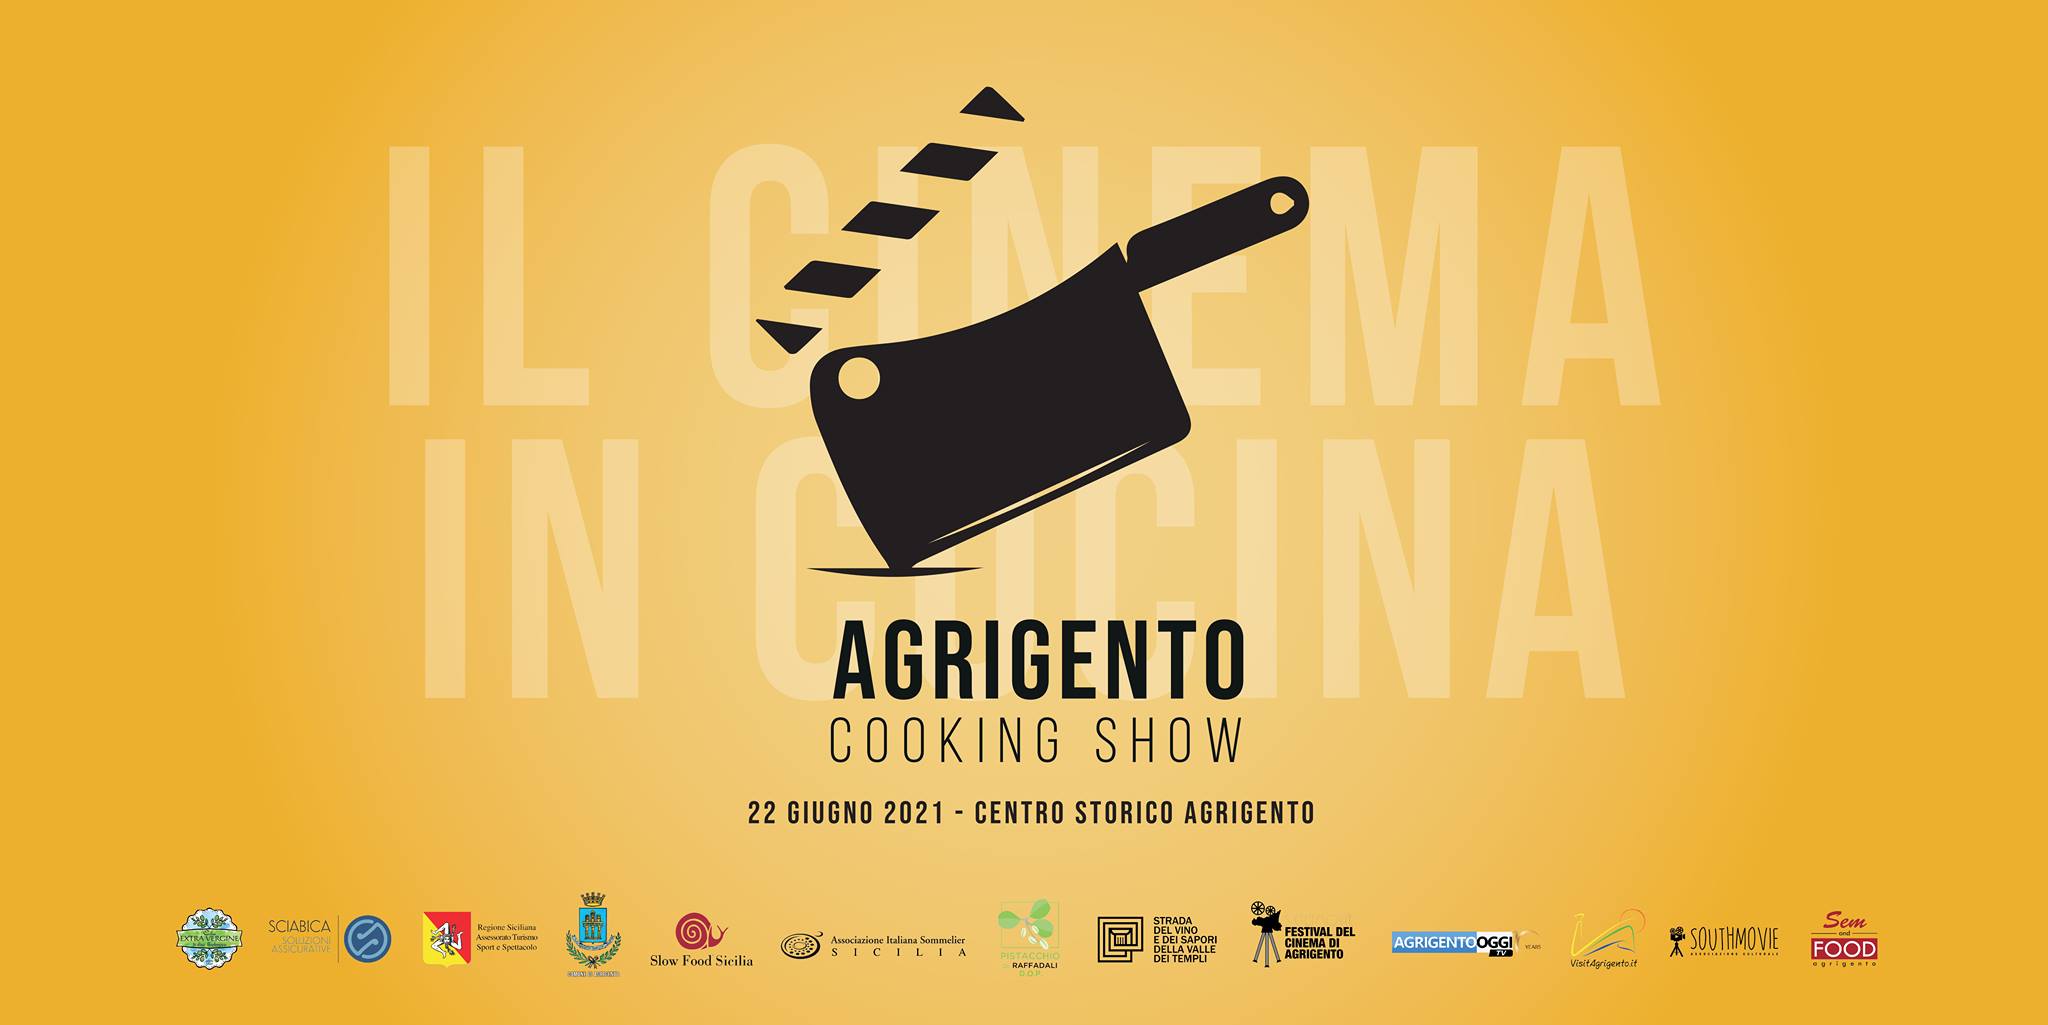 Il Cinema in cucina, arriva Agrigento Cooking Show!